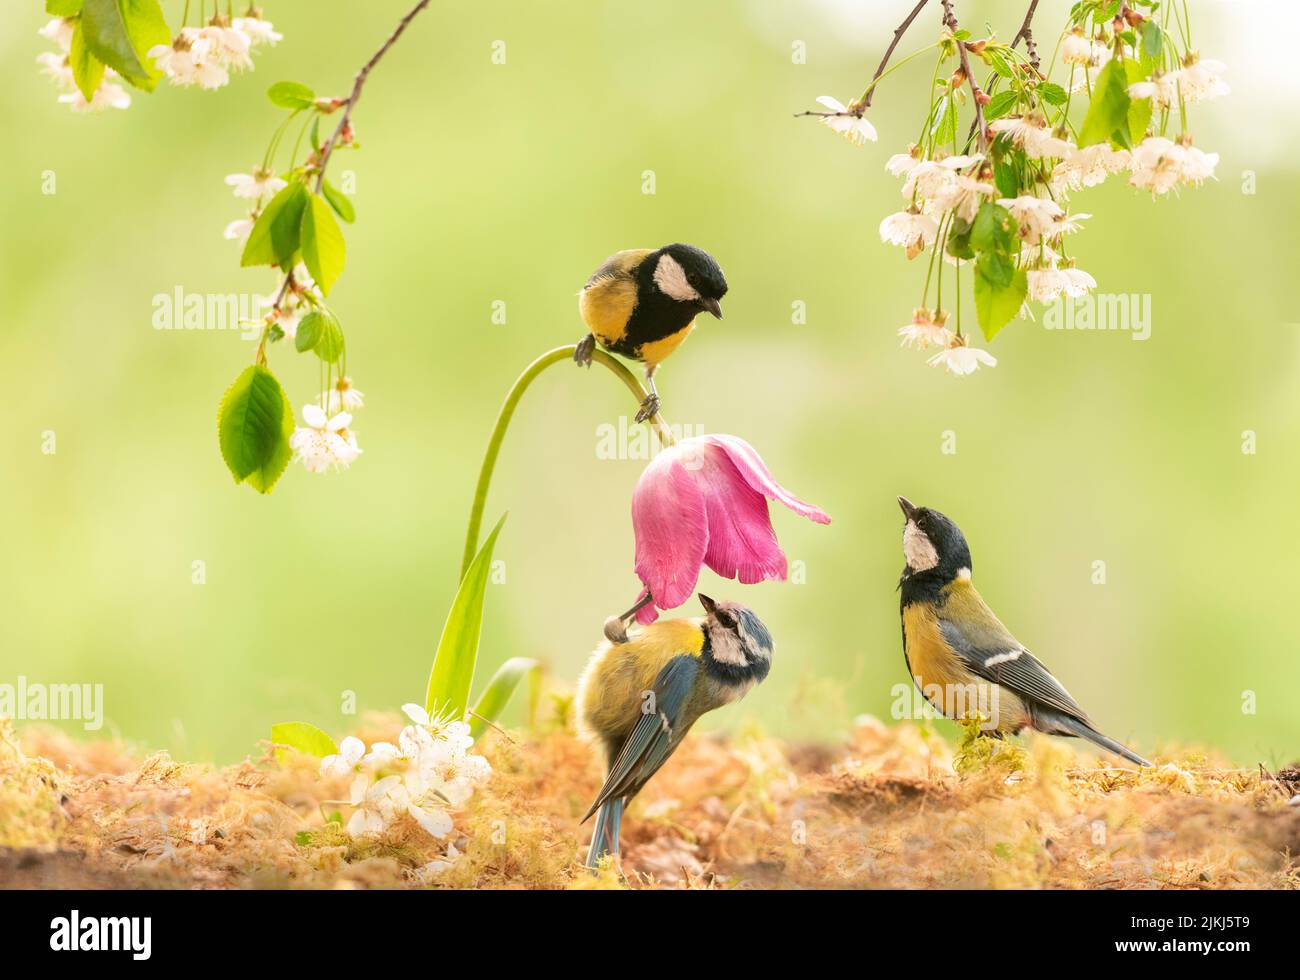 Great tit on a tulip with blue tits under it Stock Photo